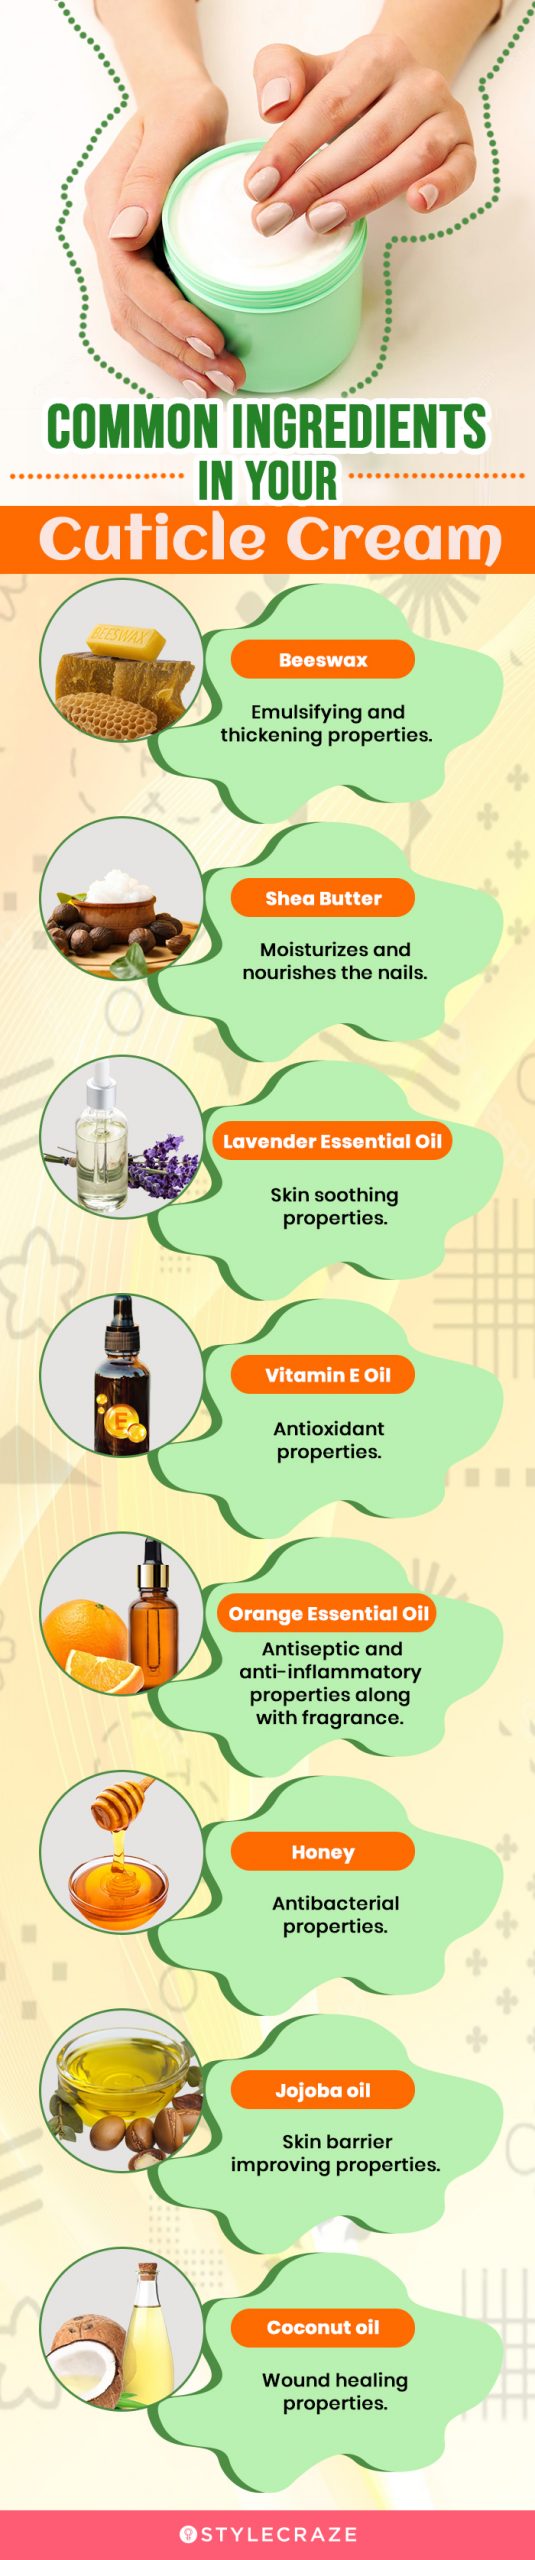 Common Ingredients In Your Cuticle Cream (infographic)